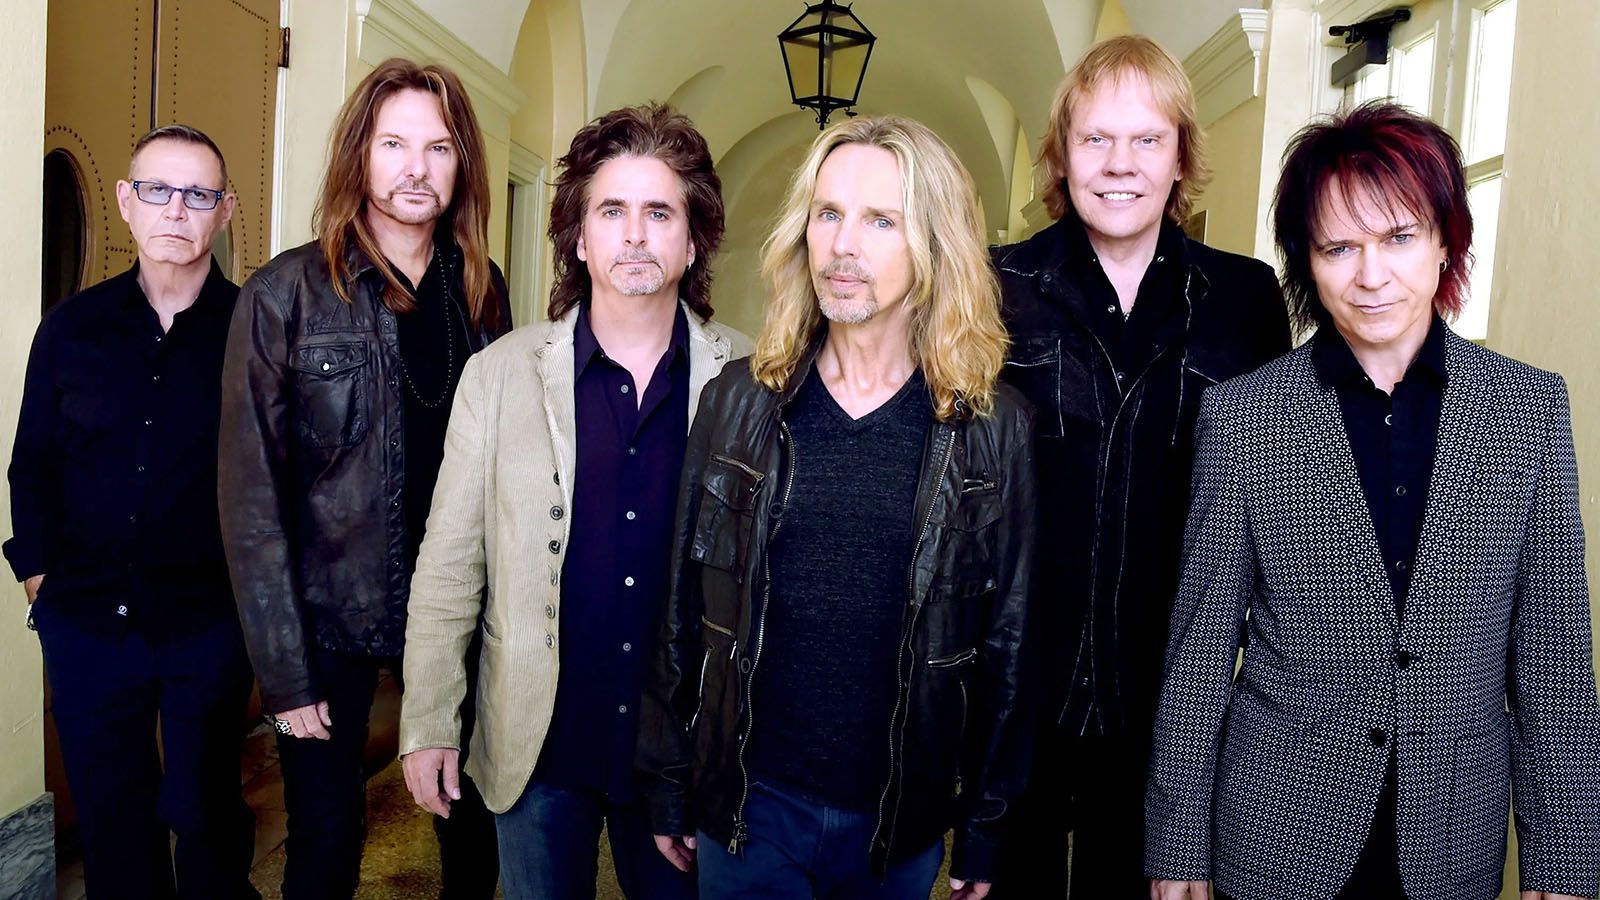 Styx has been added to the musical lineup at the Indiana State Fair.